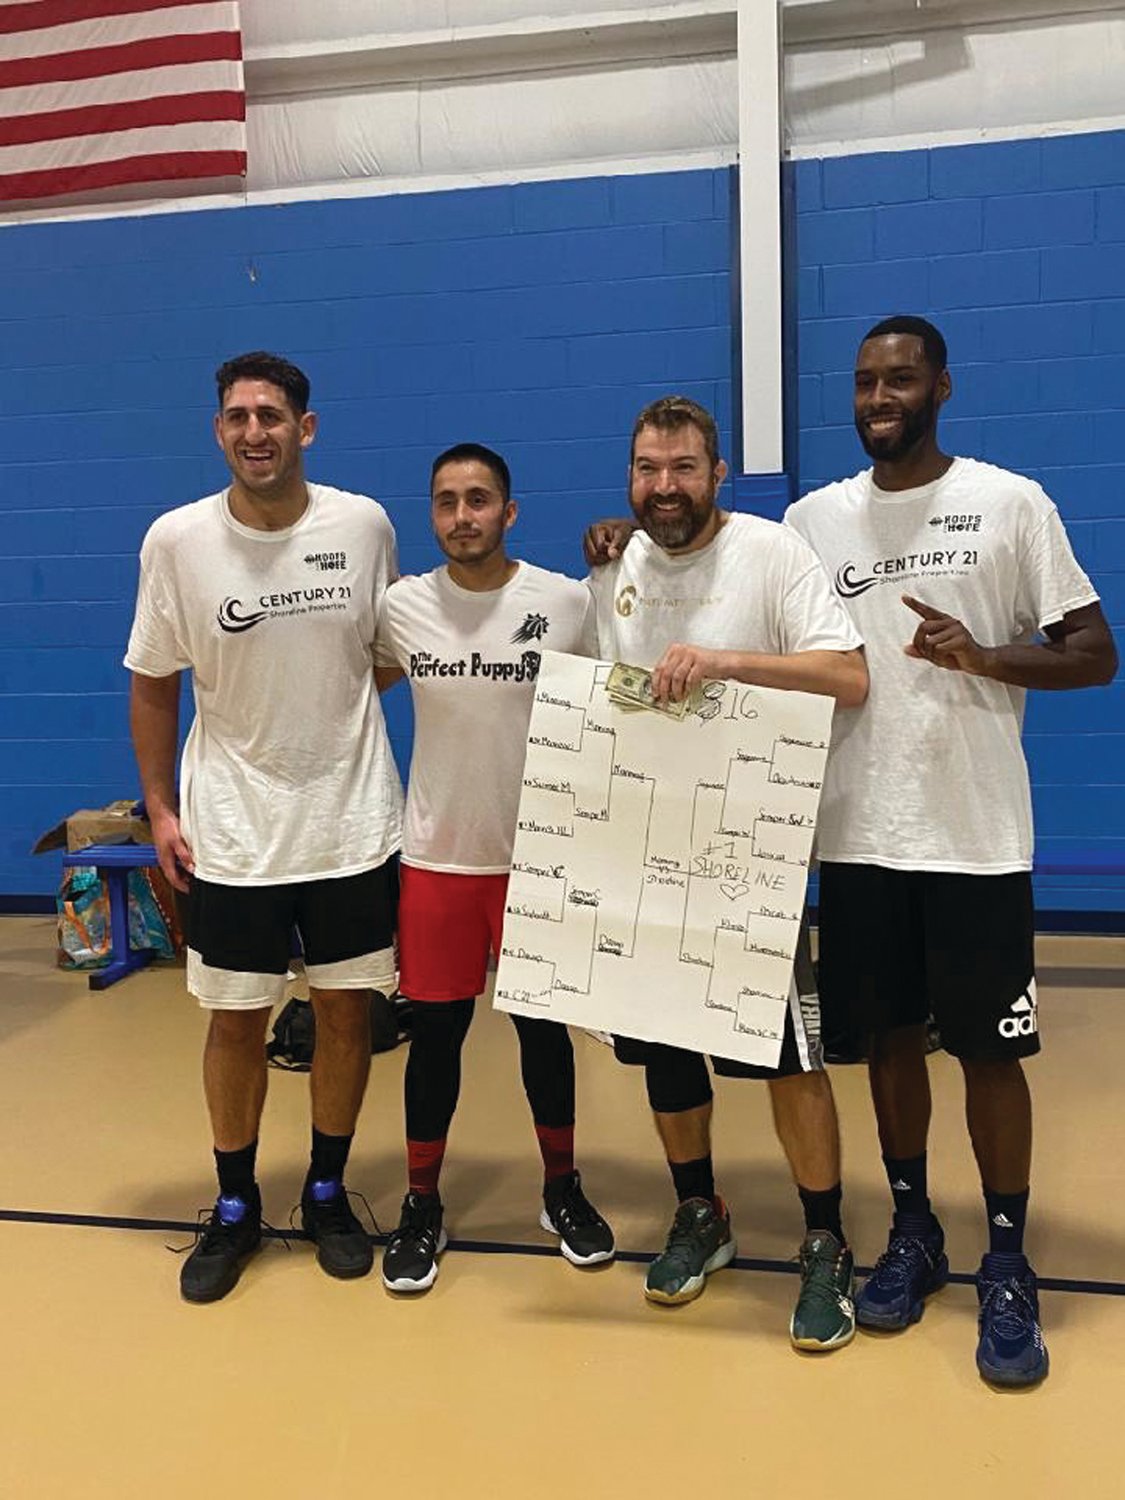 THE CHAMPIONS: The champions of last month’s Hoops for Hope tournament – Isaac Belovitch, Carlos Munoz, Matt Patty and Steve Lopes – share a moment after the event. The team returned their $500 prize to the event’s fundraising total.